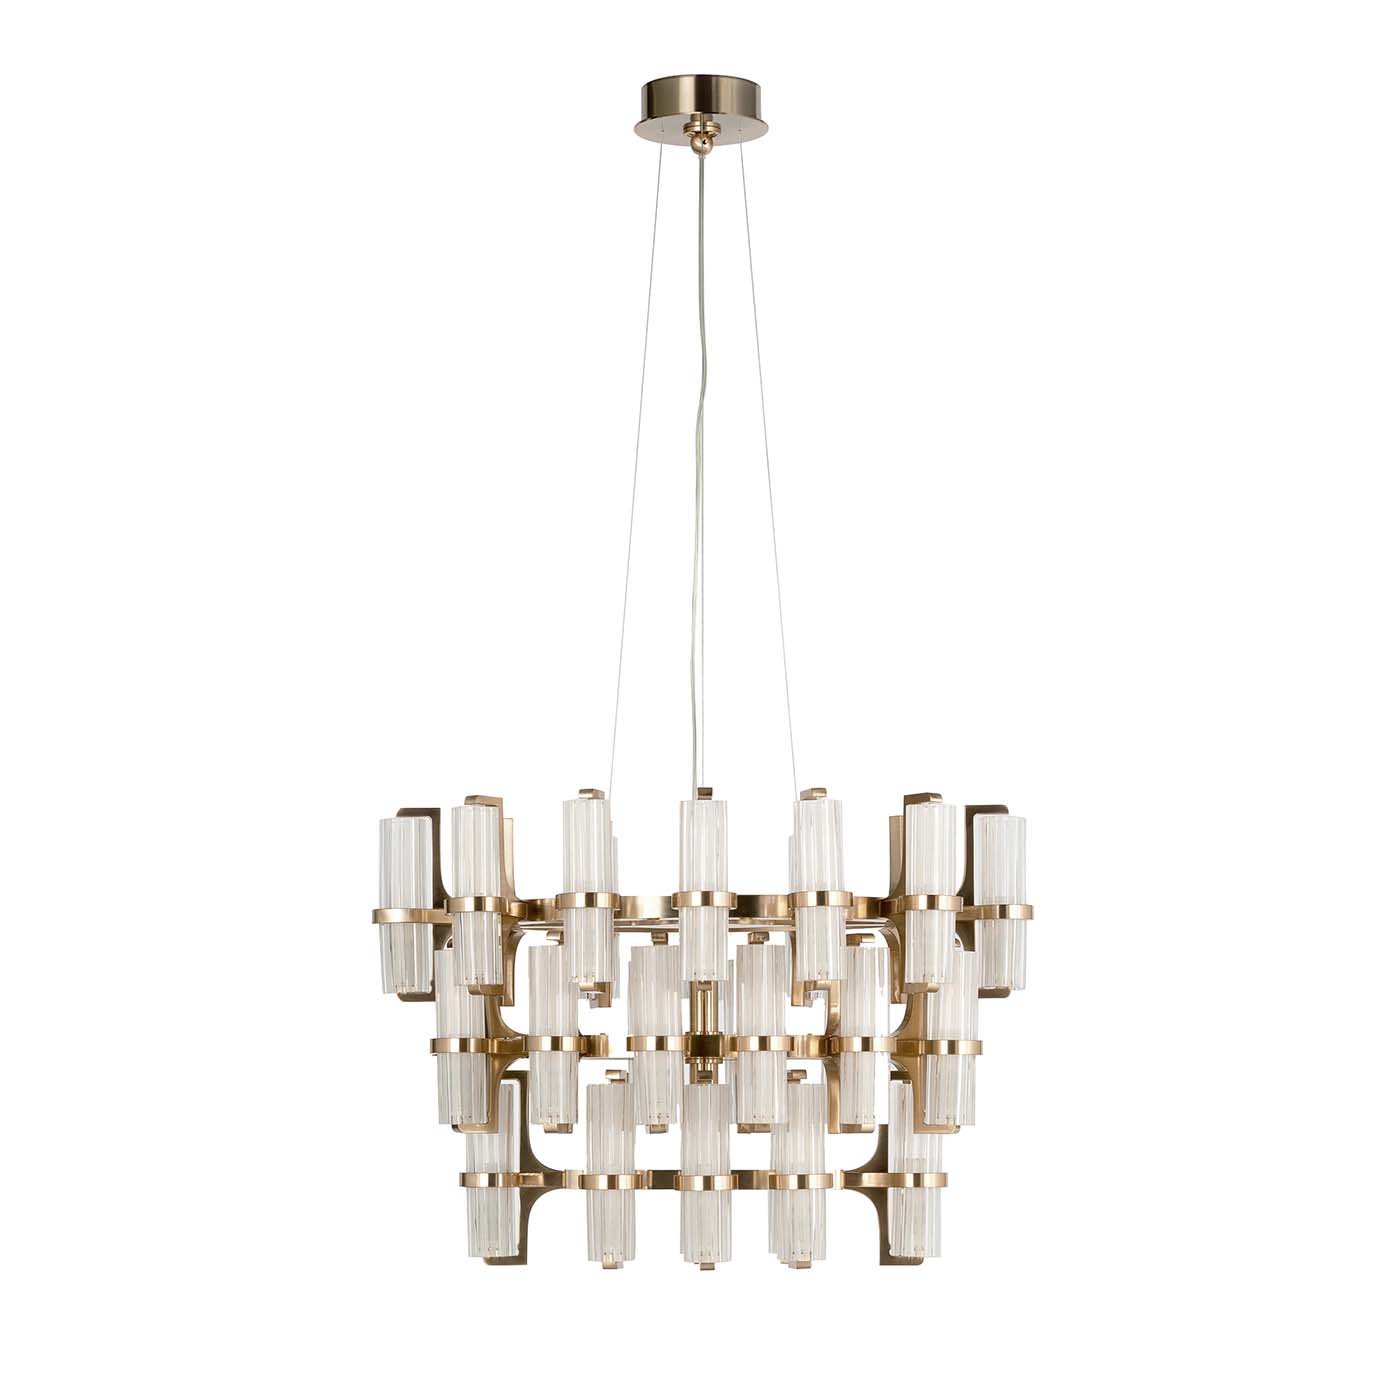 Soave Chandelier by Emanuela Benedetti - Main view